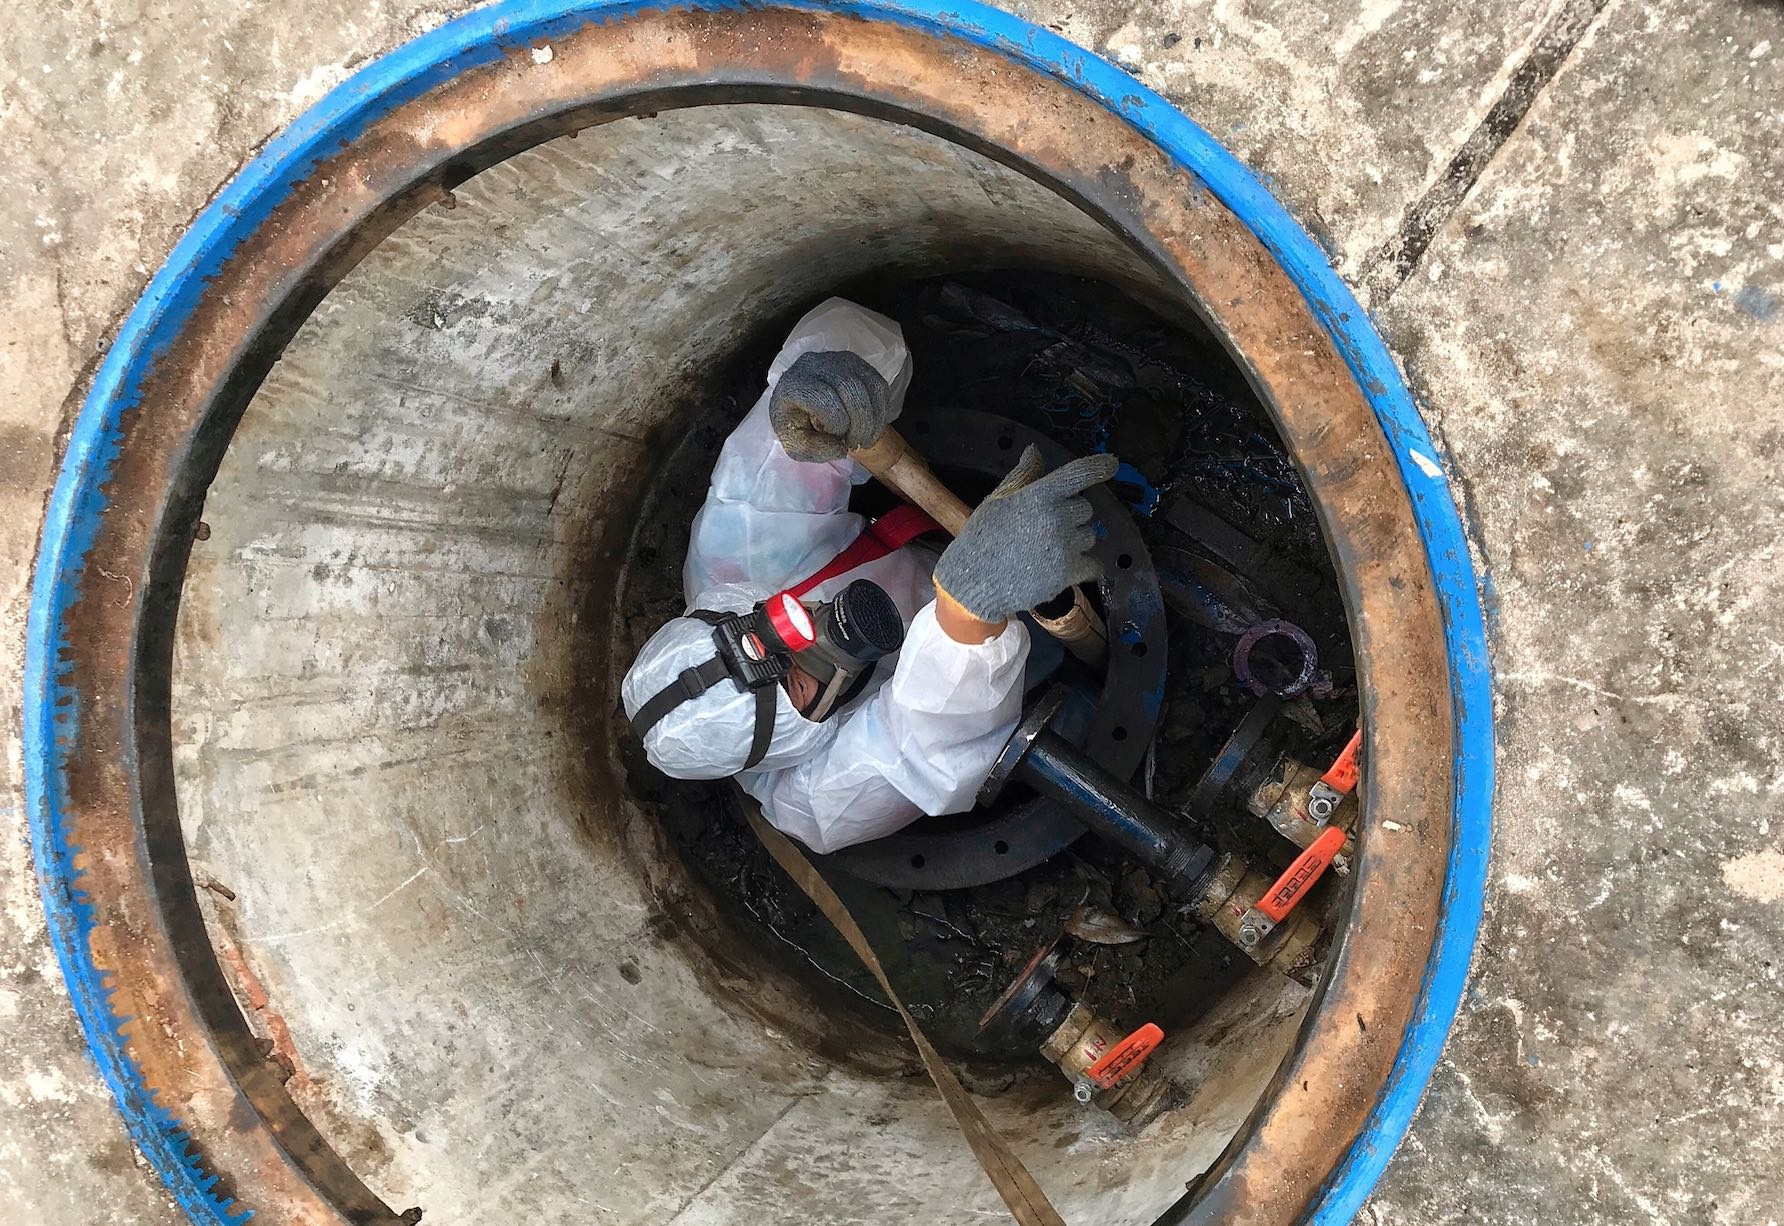 Confined Space Safety Whats The Correct Ppe Equipment For Working In